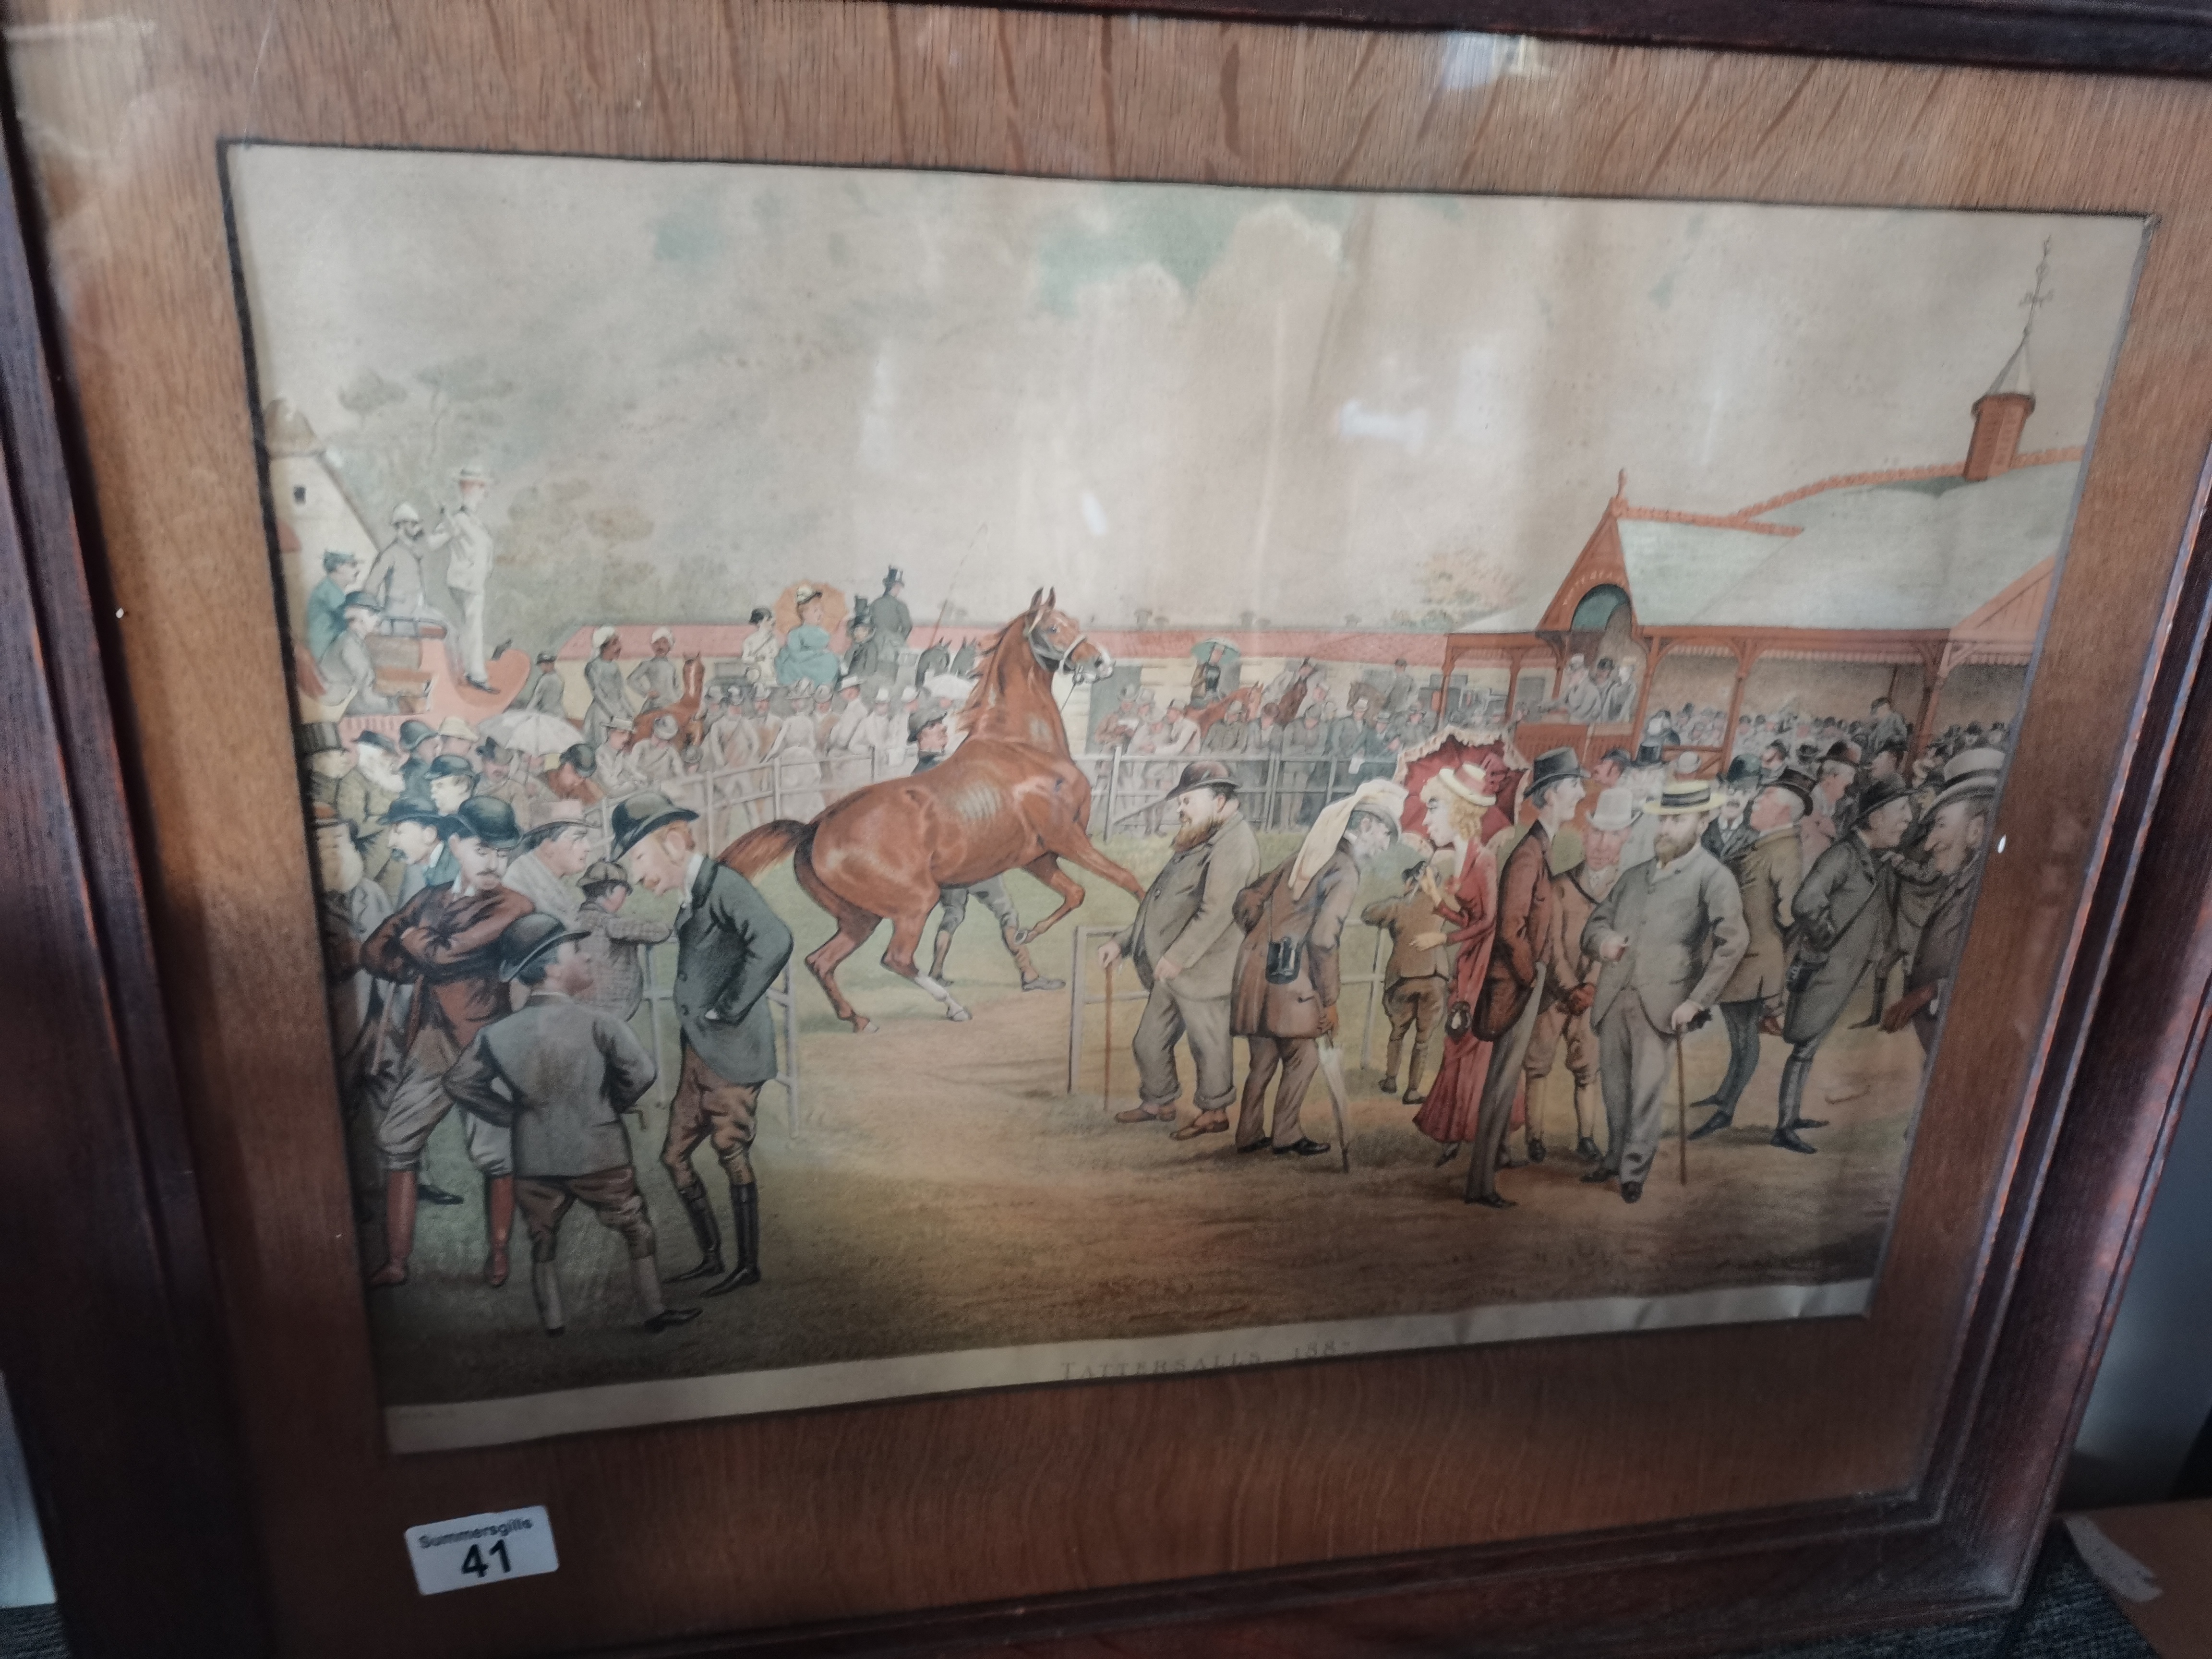 1887 Tattersalls Racing Picture By Day & Son with Edward Prince of Wales talking to other - Image 4 of 4